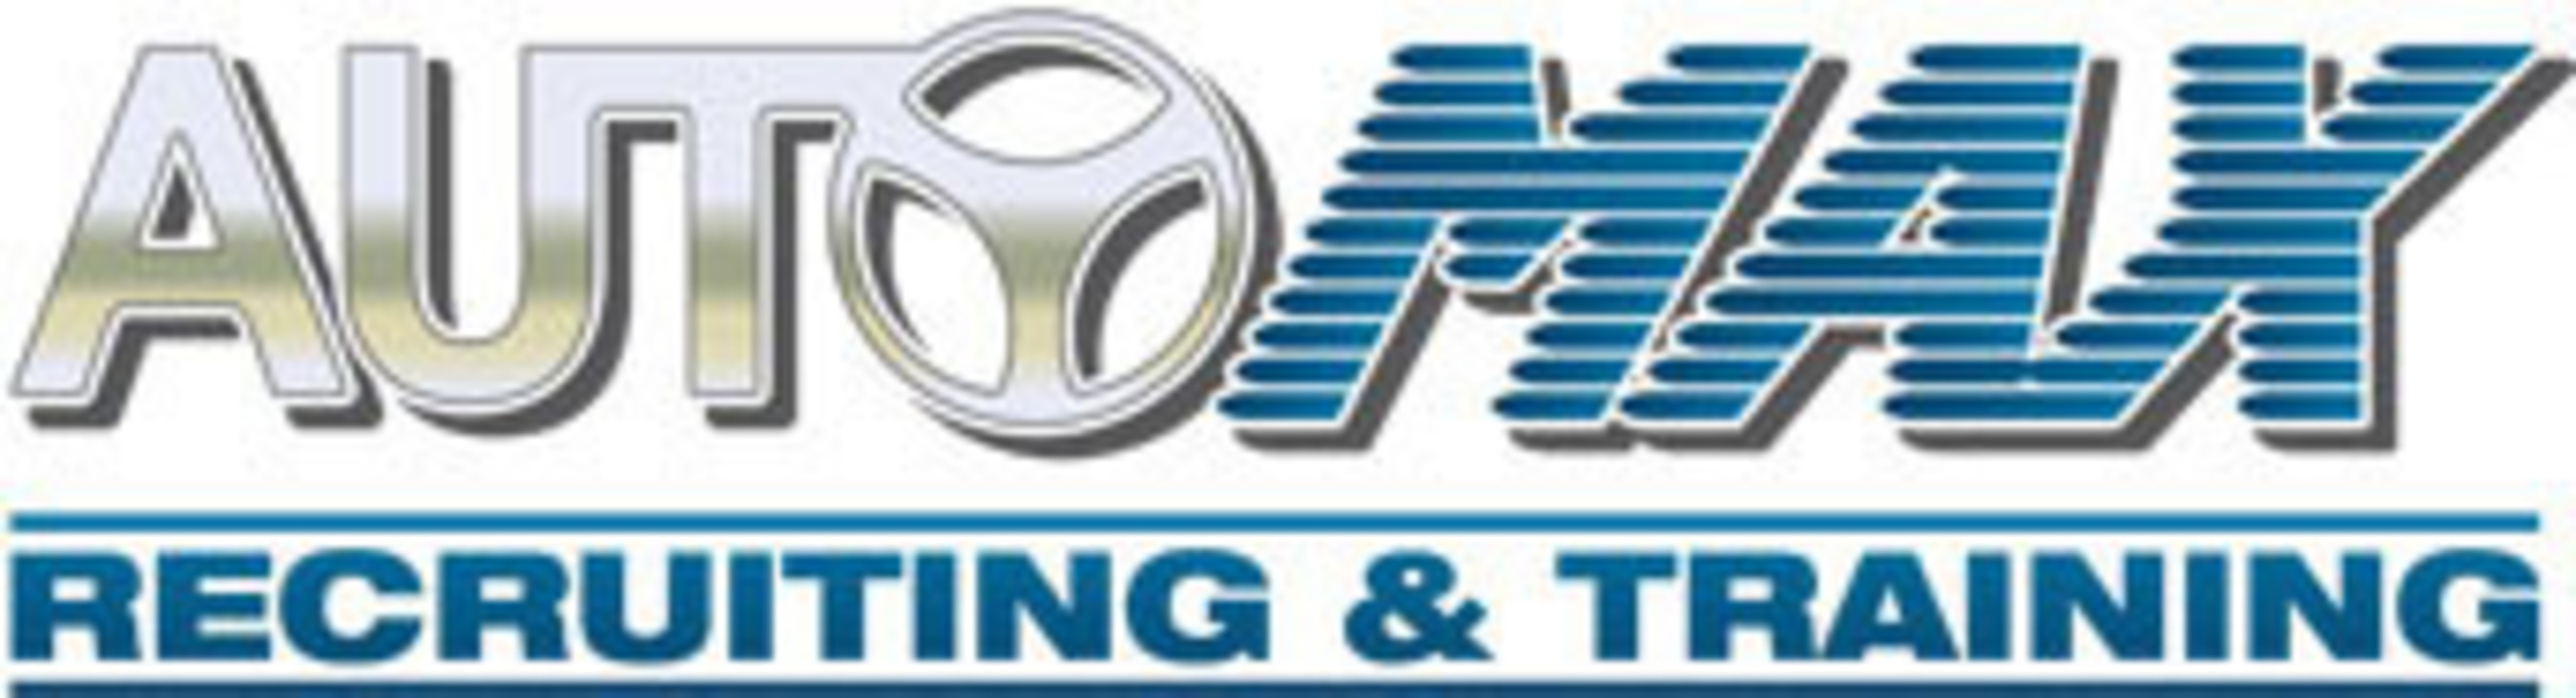 AutoMax Recruiting and Training Logo. (PRNewsFoto/AutoMax Recruiting and Training)